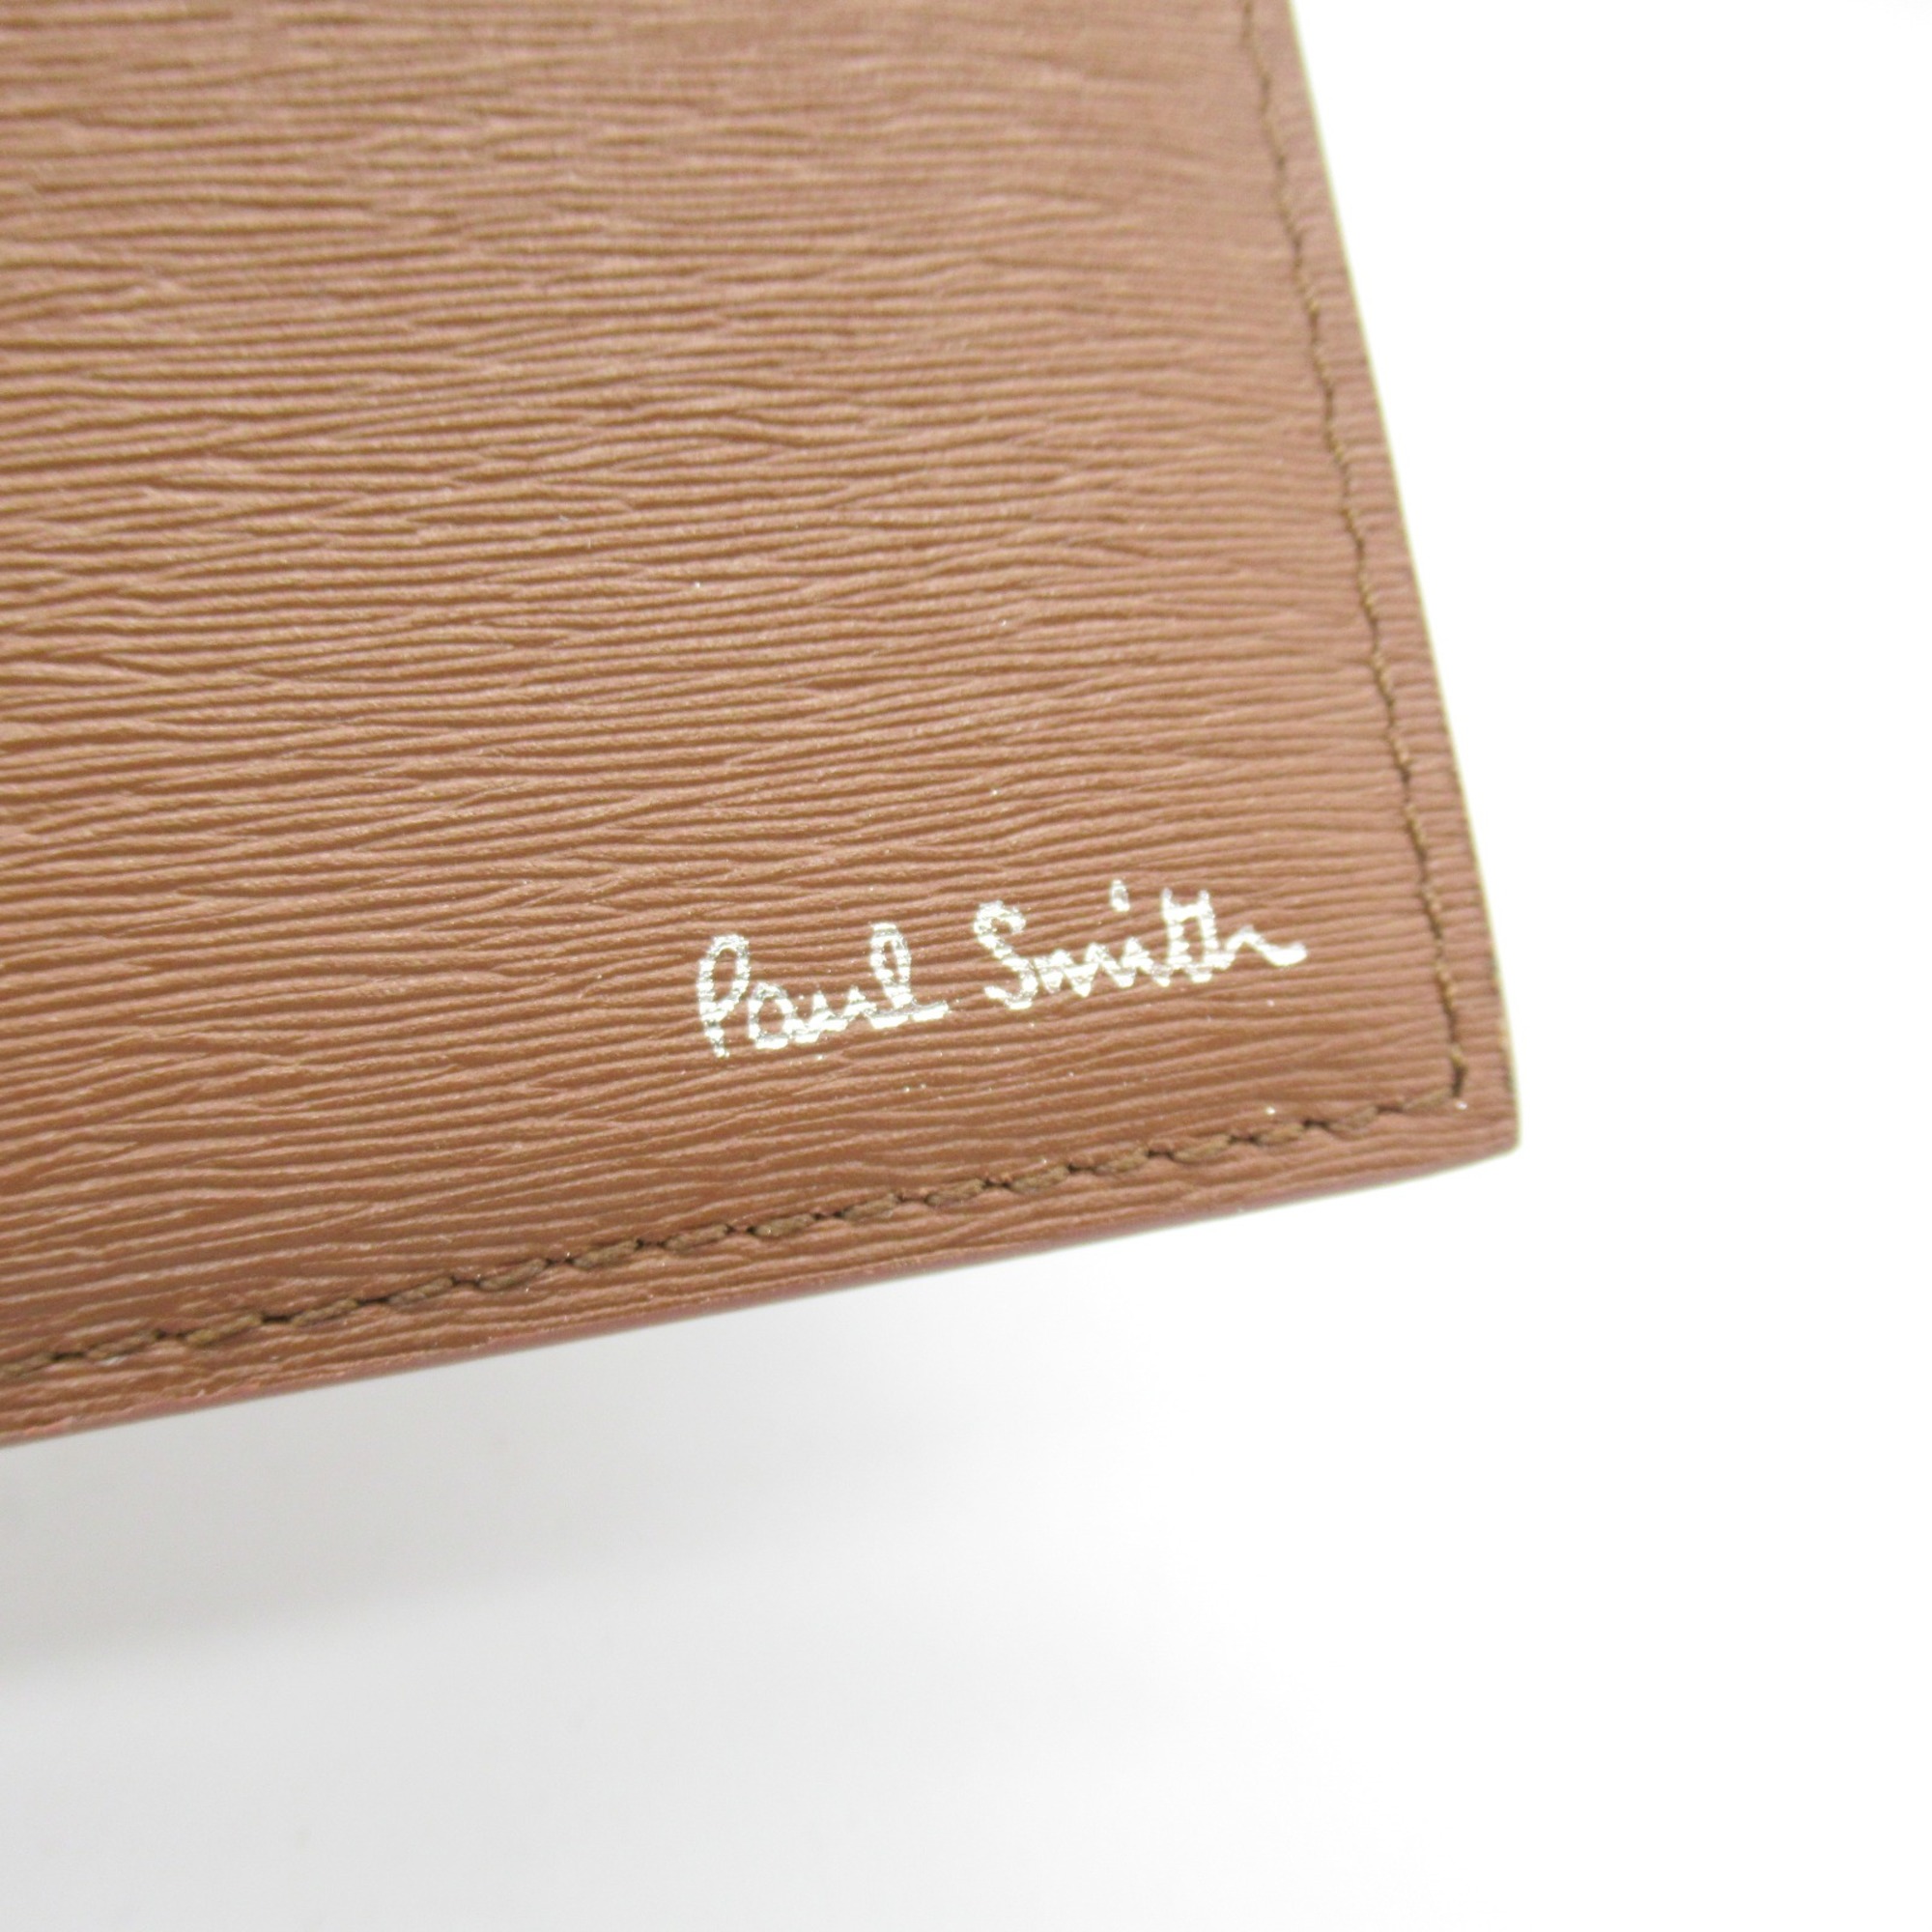 Paul Smith wallet Brown Tan leather 483362